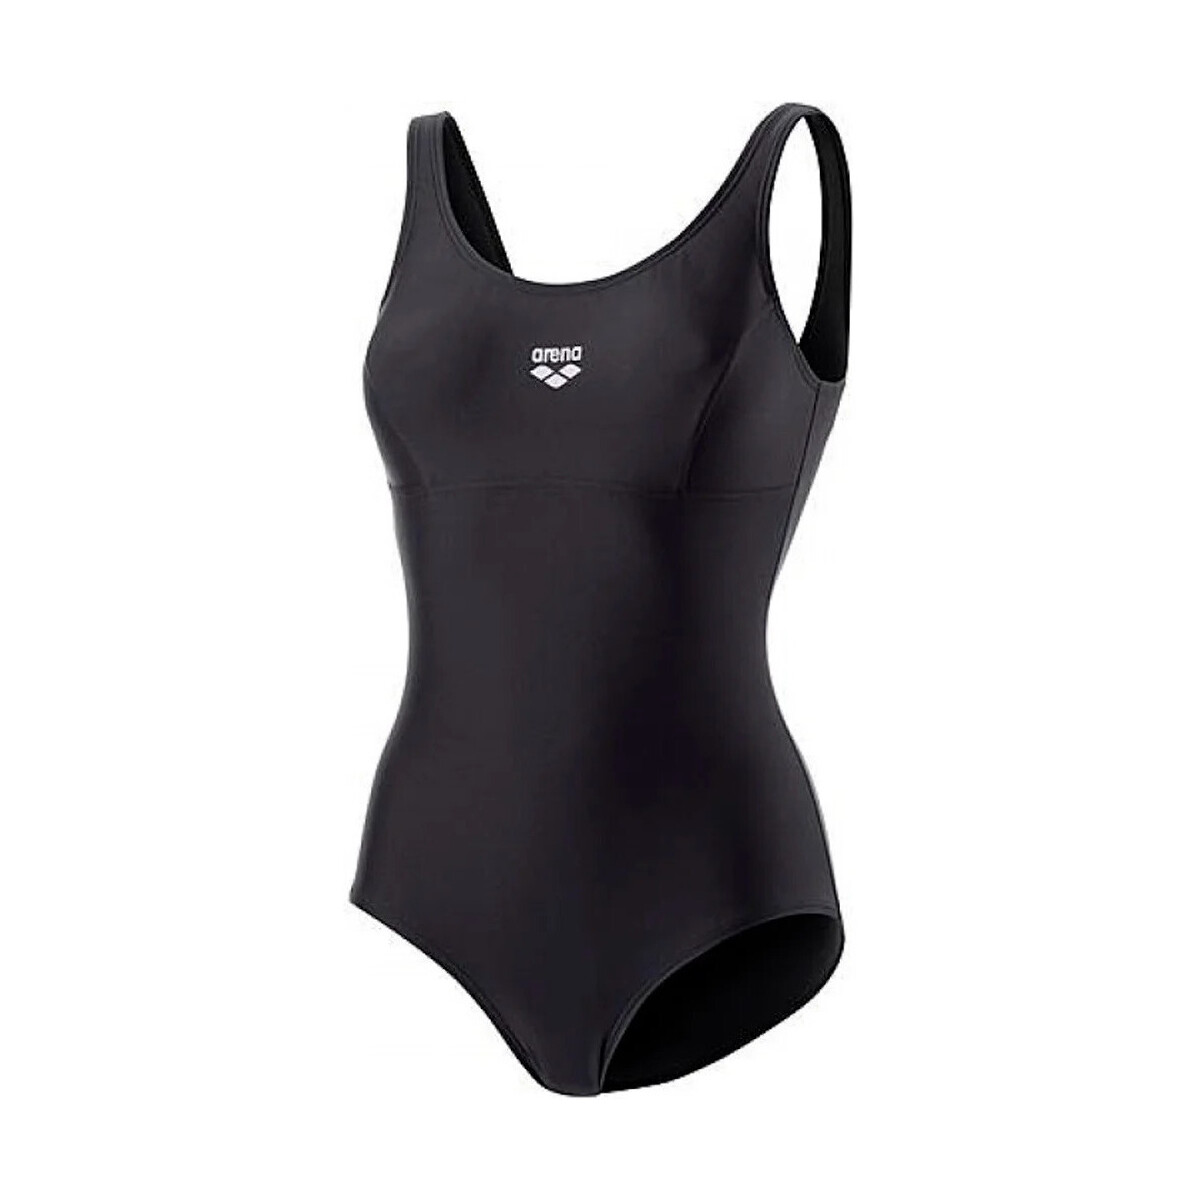 textil Mujer Bañador Arena MELBY ONE PIECE NEPL Negro